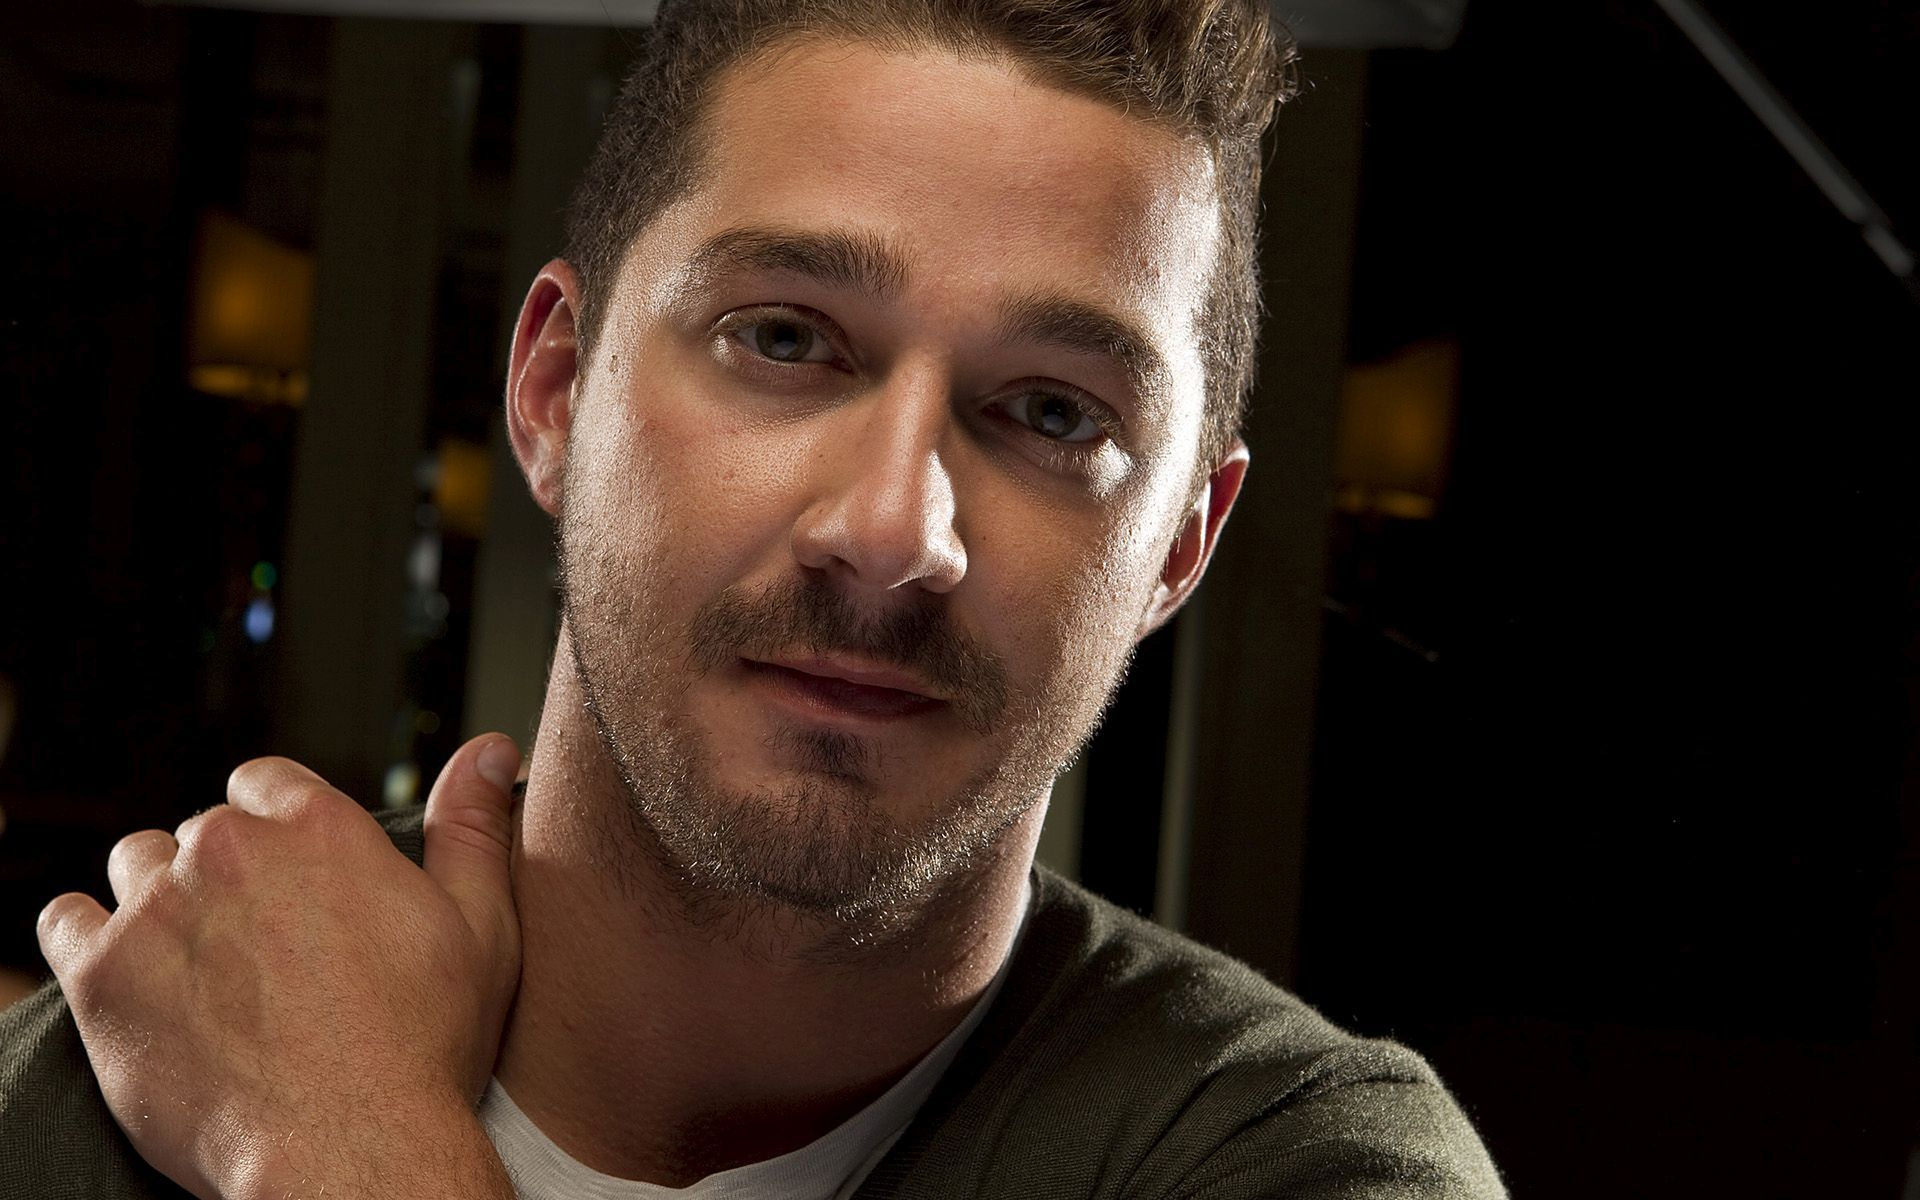 1920x1200 Free download Shia Labeouf Desktop Wallpapers HD Wallpapers Backgrounds of Your [] for your Desktop, Mobile \u0026 Tablet | Explore 48+ Shia LaBeouf Wallpaper | Shia LaBeouf Just Do It Wallpaper, Shia